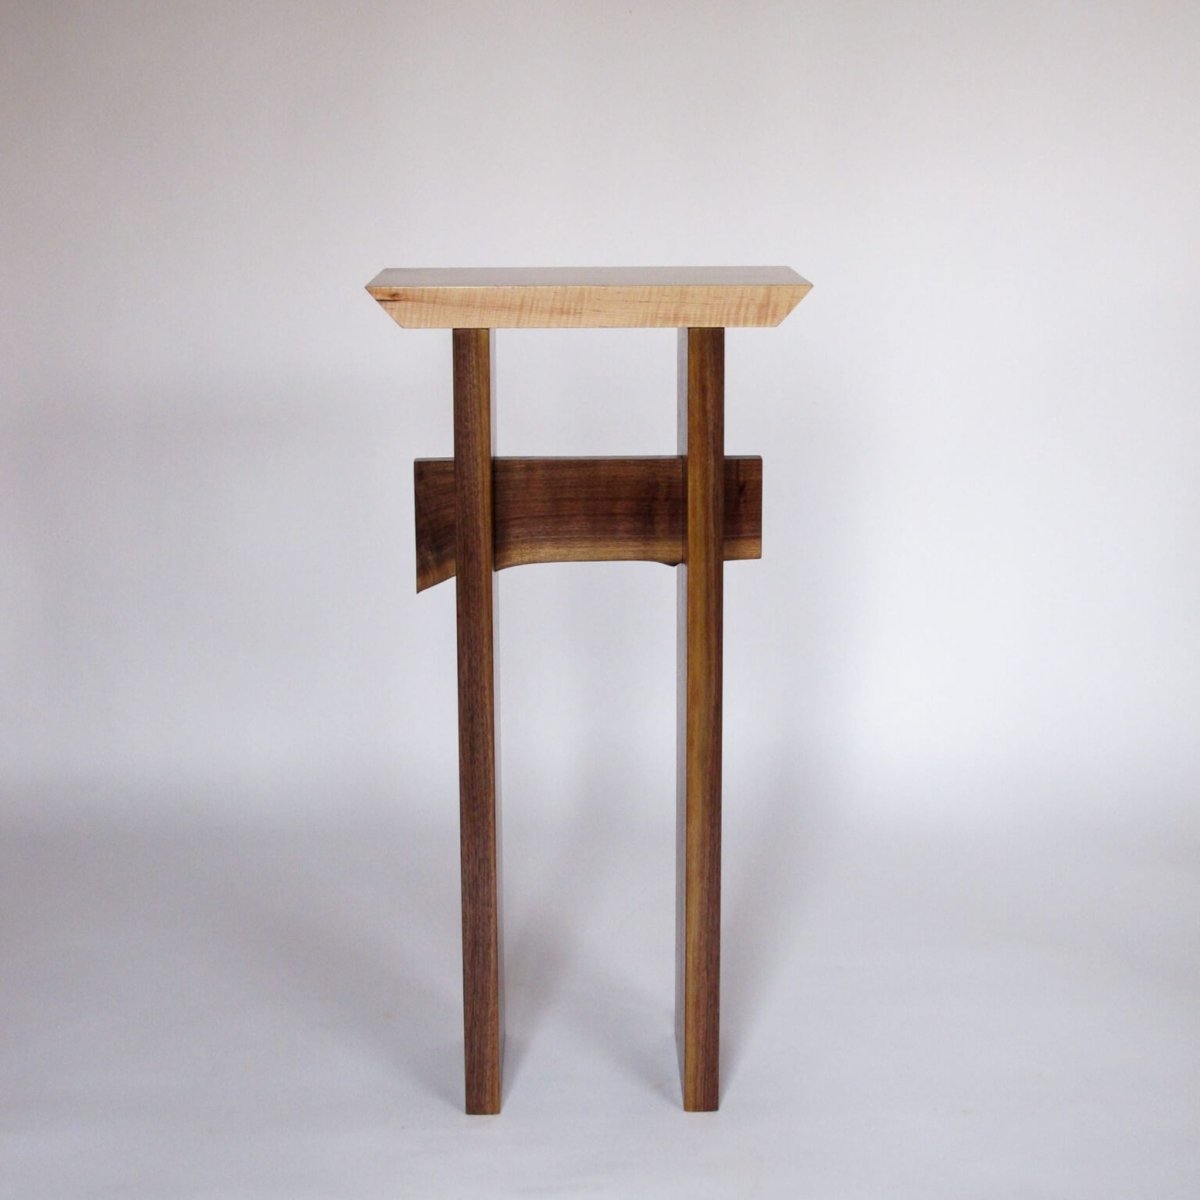 a small entry table that is tall and is a solid wood entry table by Mokuzai Furniture